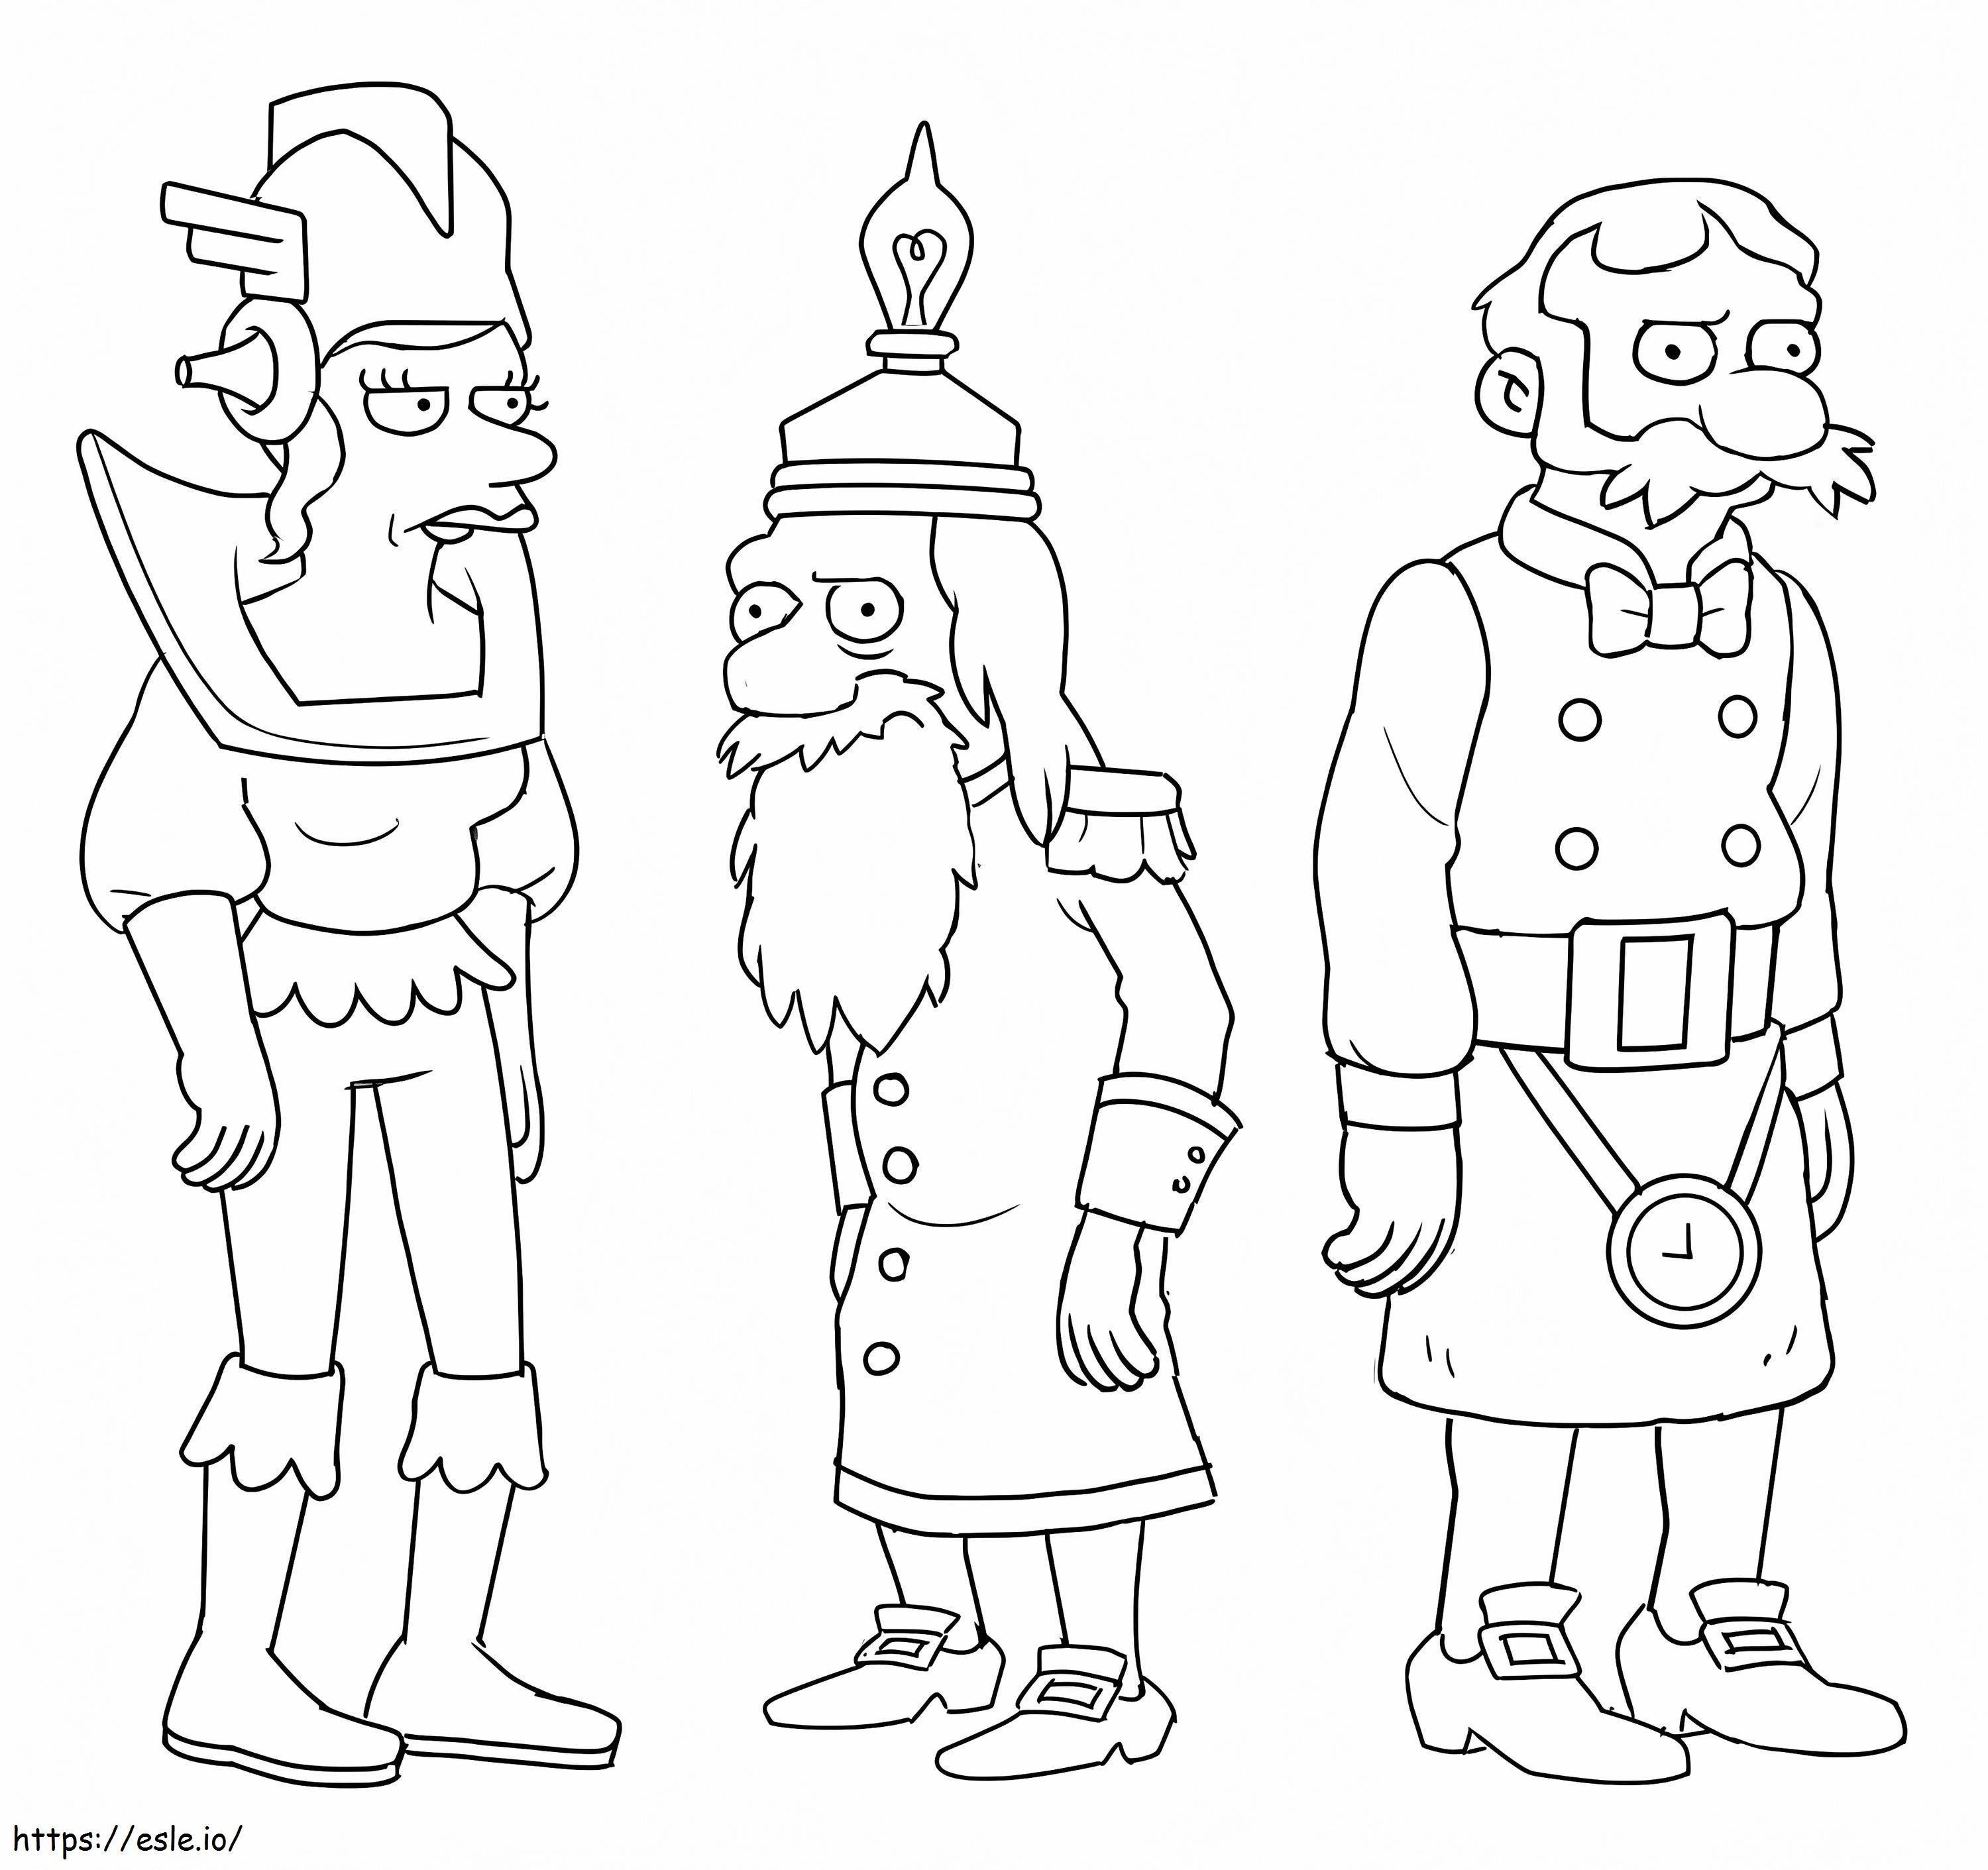 Characters From Disenchantment coloring page